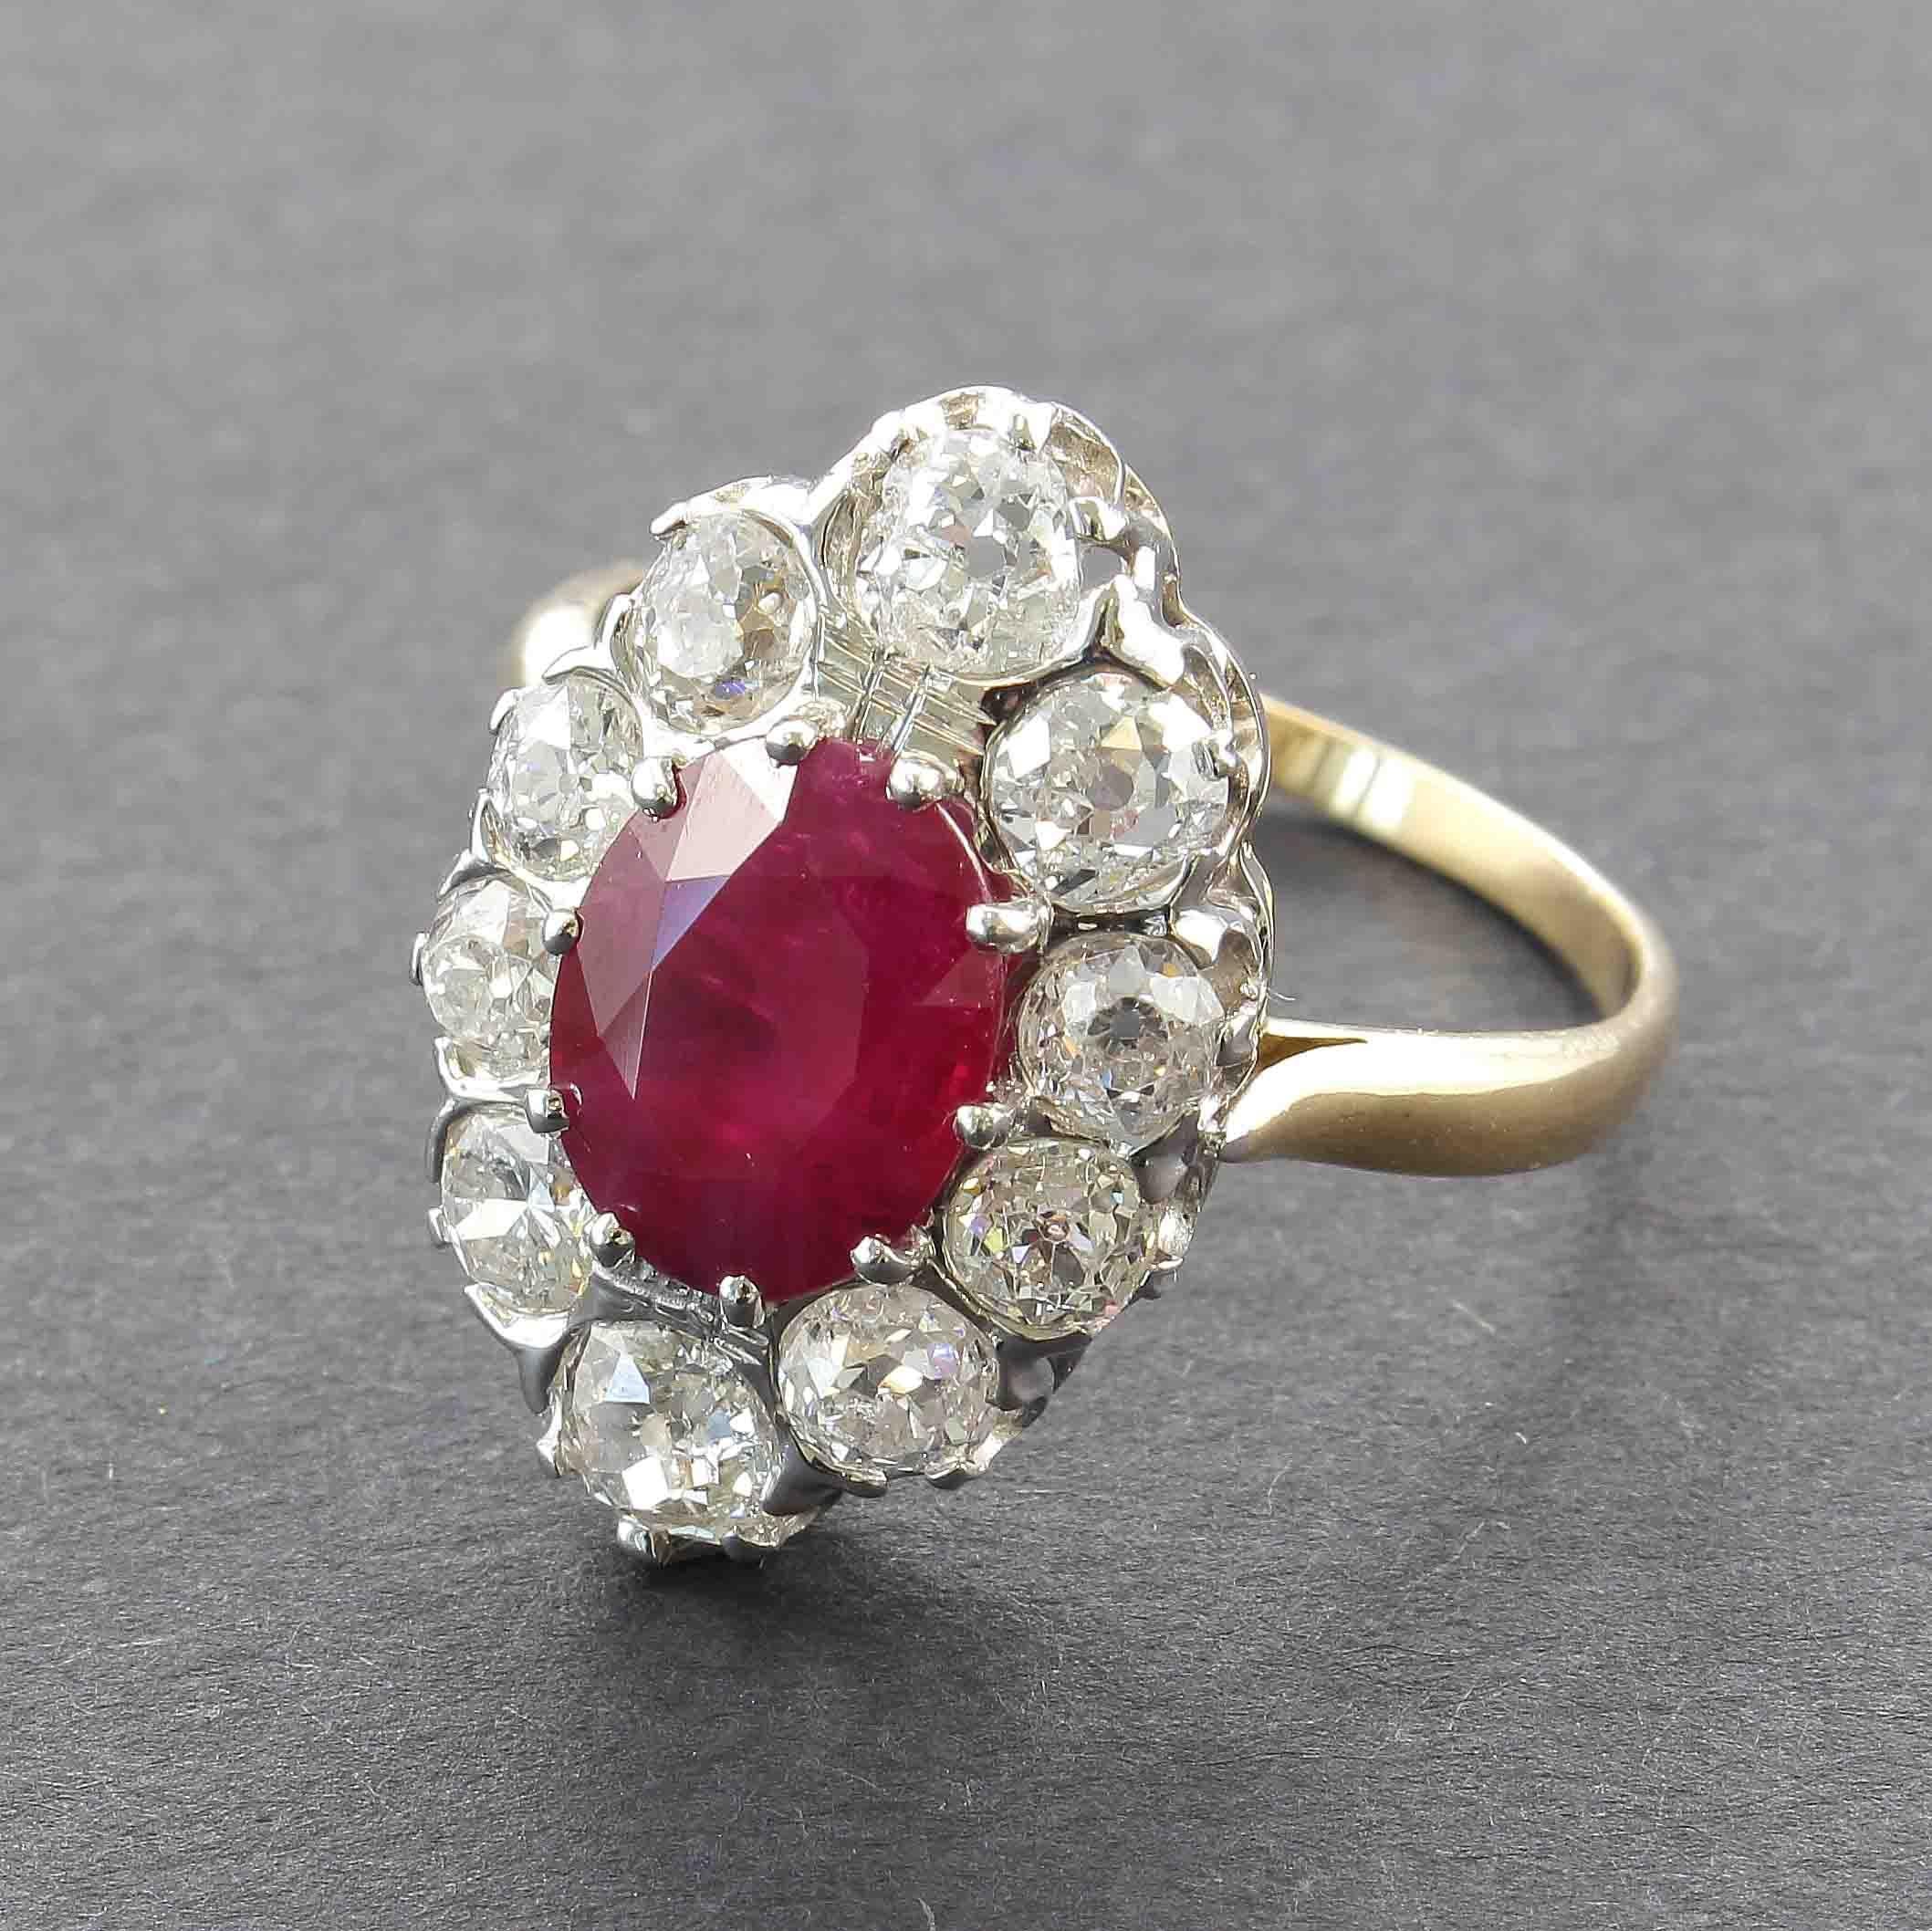 Early cultures treasured rubies for their similarity to the redness of the blood that flowed through their veins, and believed that rubies held the power of life. This glamorous color is tangled between quintessential art deco symmetrical design.